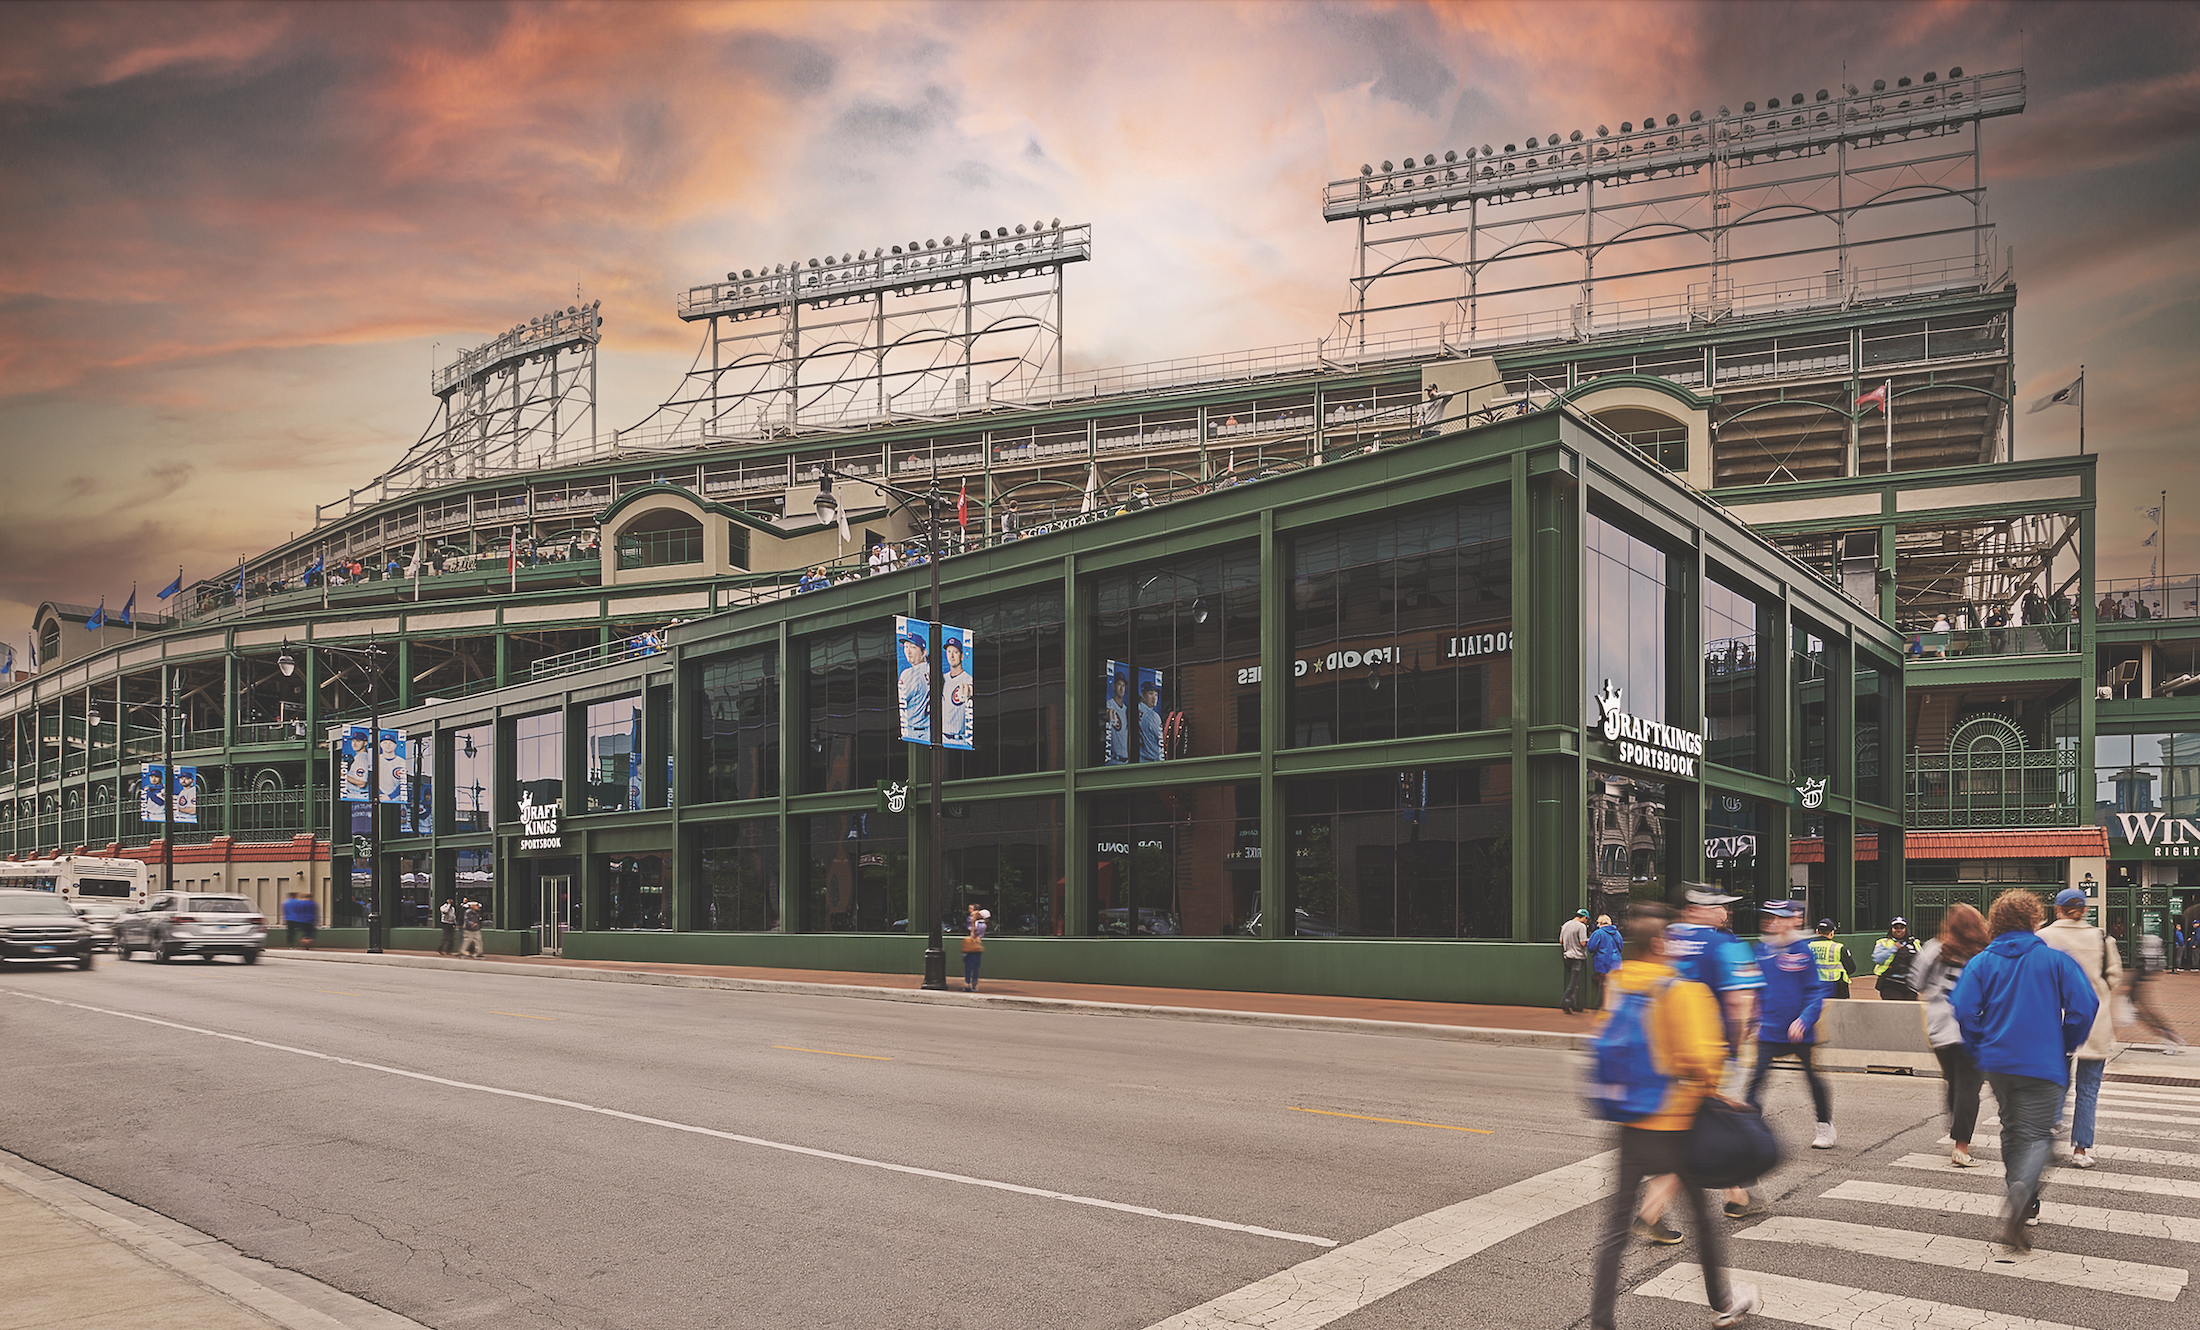 The DraftKings Sportsbook, which opened on June 27, 2023, is a new facet in Wrigleyville’s entertainment complex adjacent to Wrigley Field,